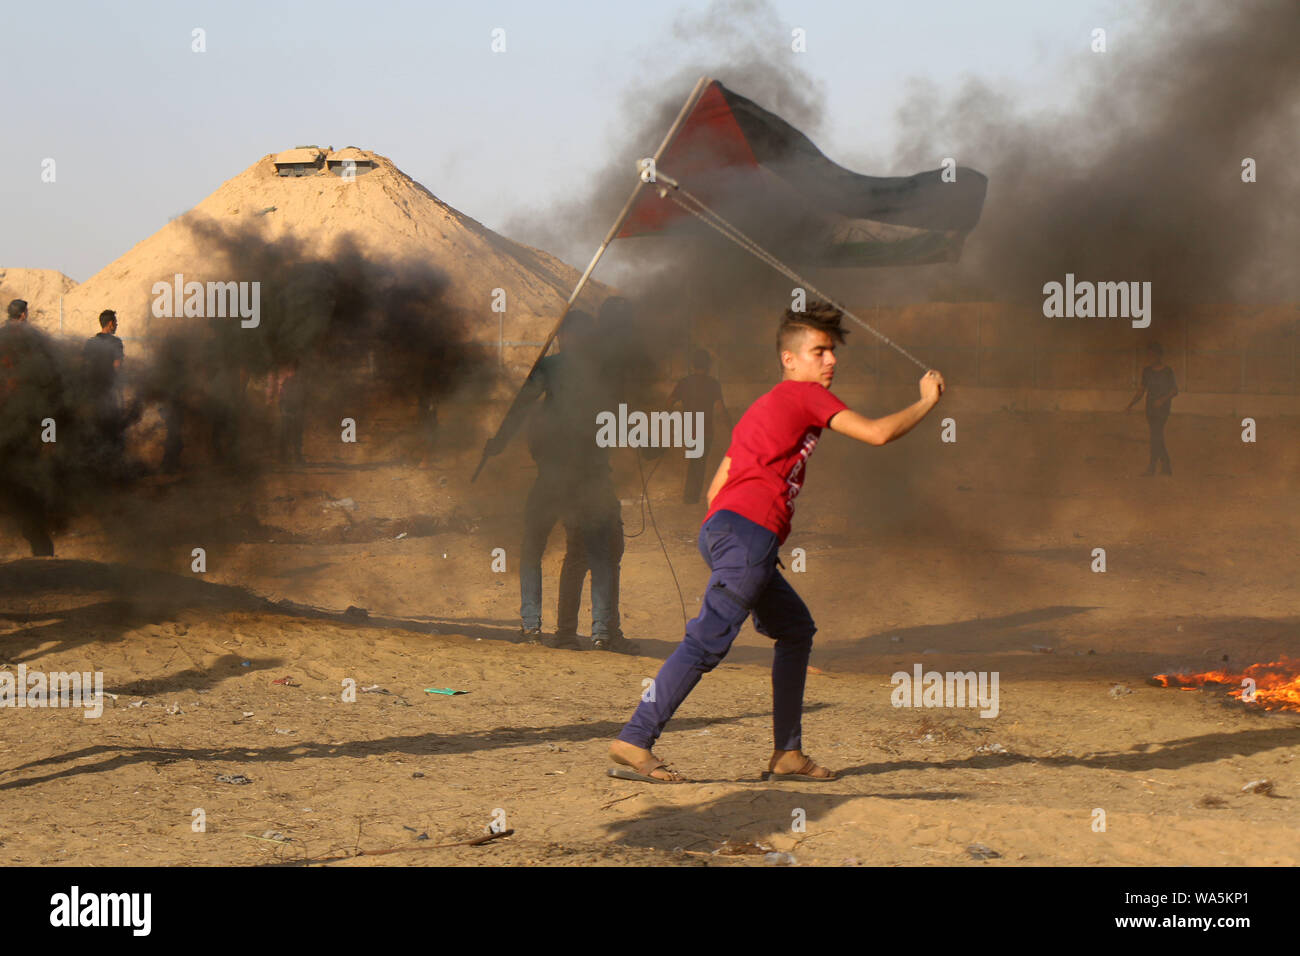 Khan Younis, Gaza Strip, Palestinian Territory. 16th Aug, 2019. Palestinian protesters clash with Israeli troops following the tents protest where Palestinians demand the right to return to their homeland at the Israel-Gaza border. Credit: Mariam Dagga/APA Images/ZUMA Wire/Alamy Live News Stock Photo